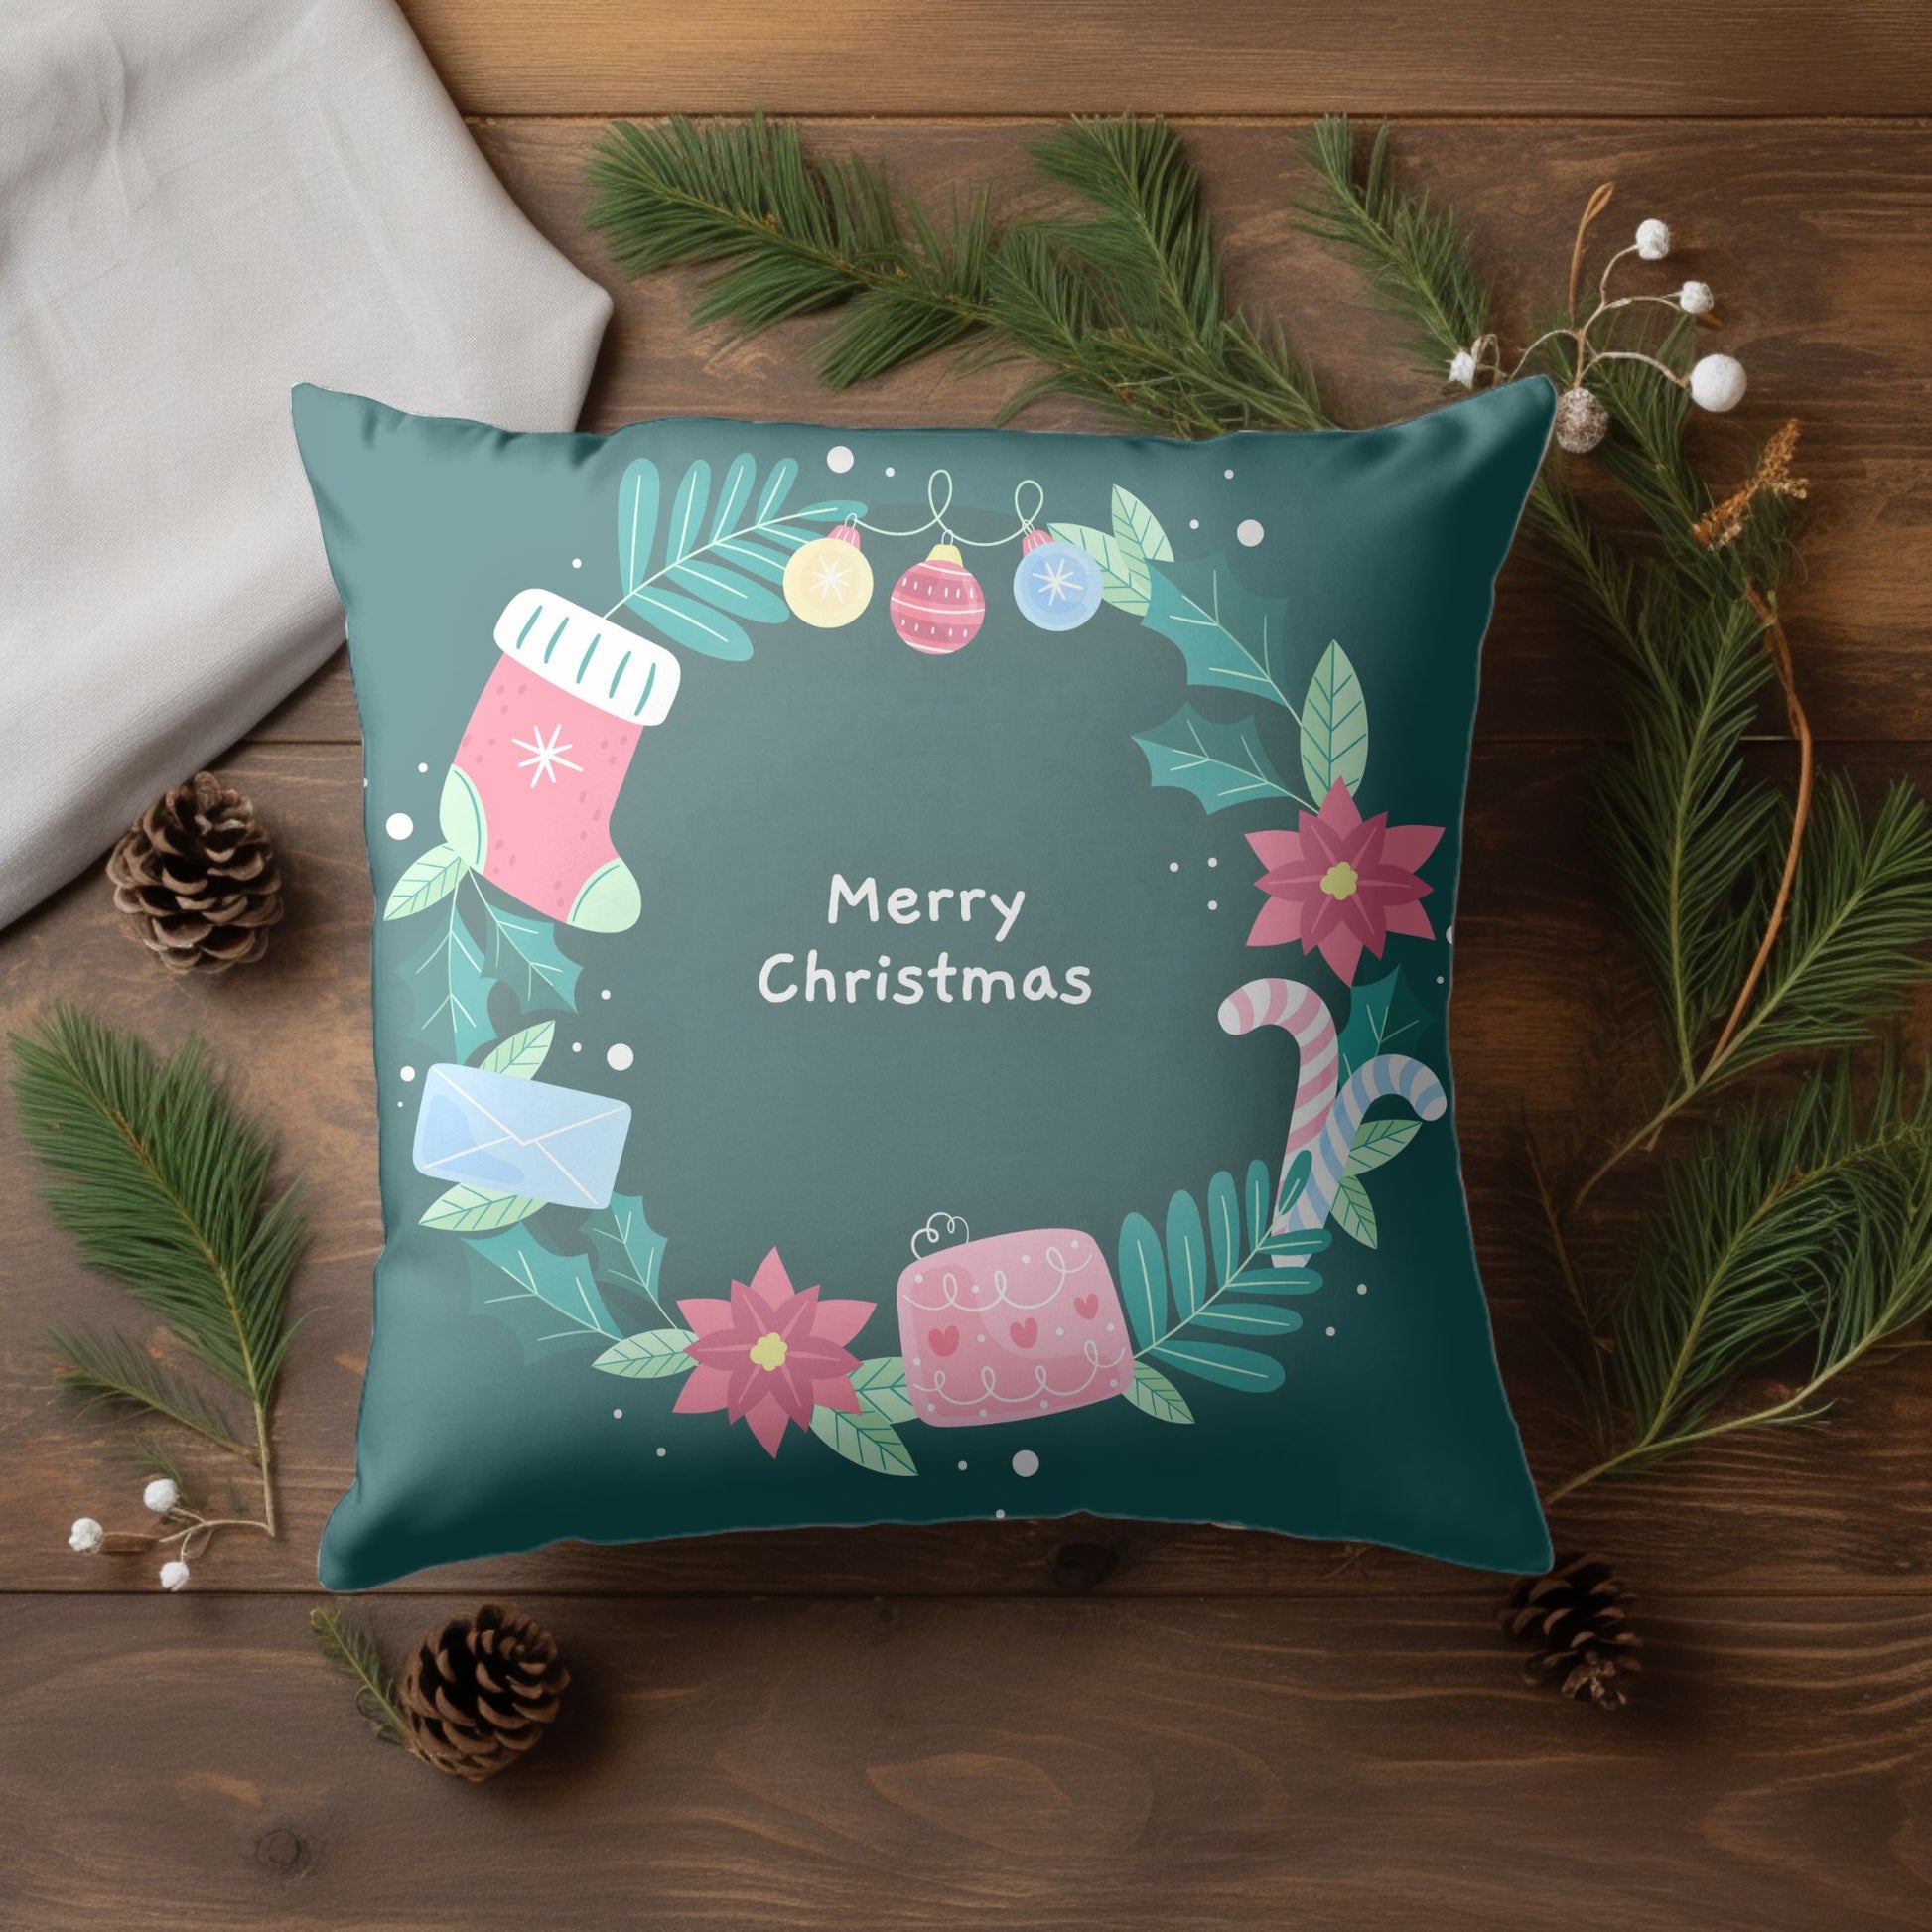 Welcome your holiday guests with this decorative cushion